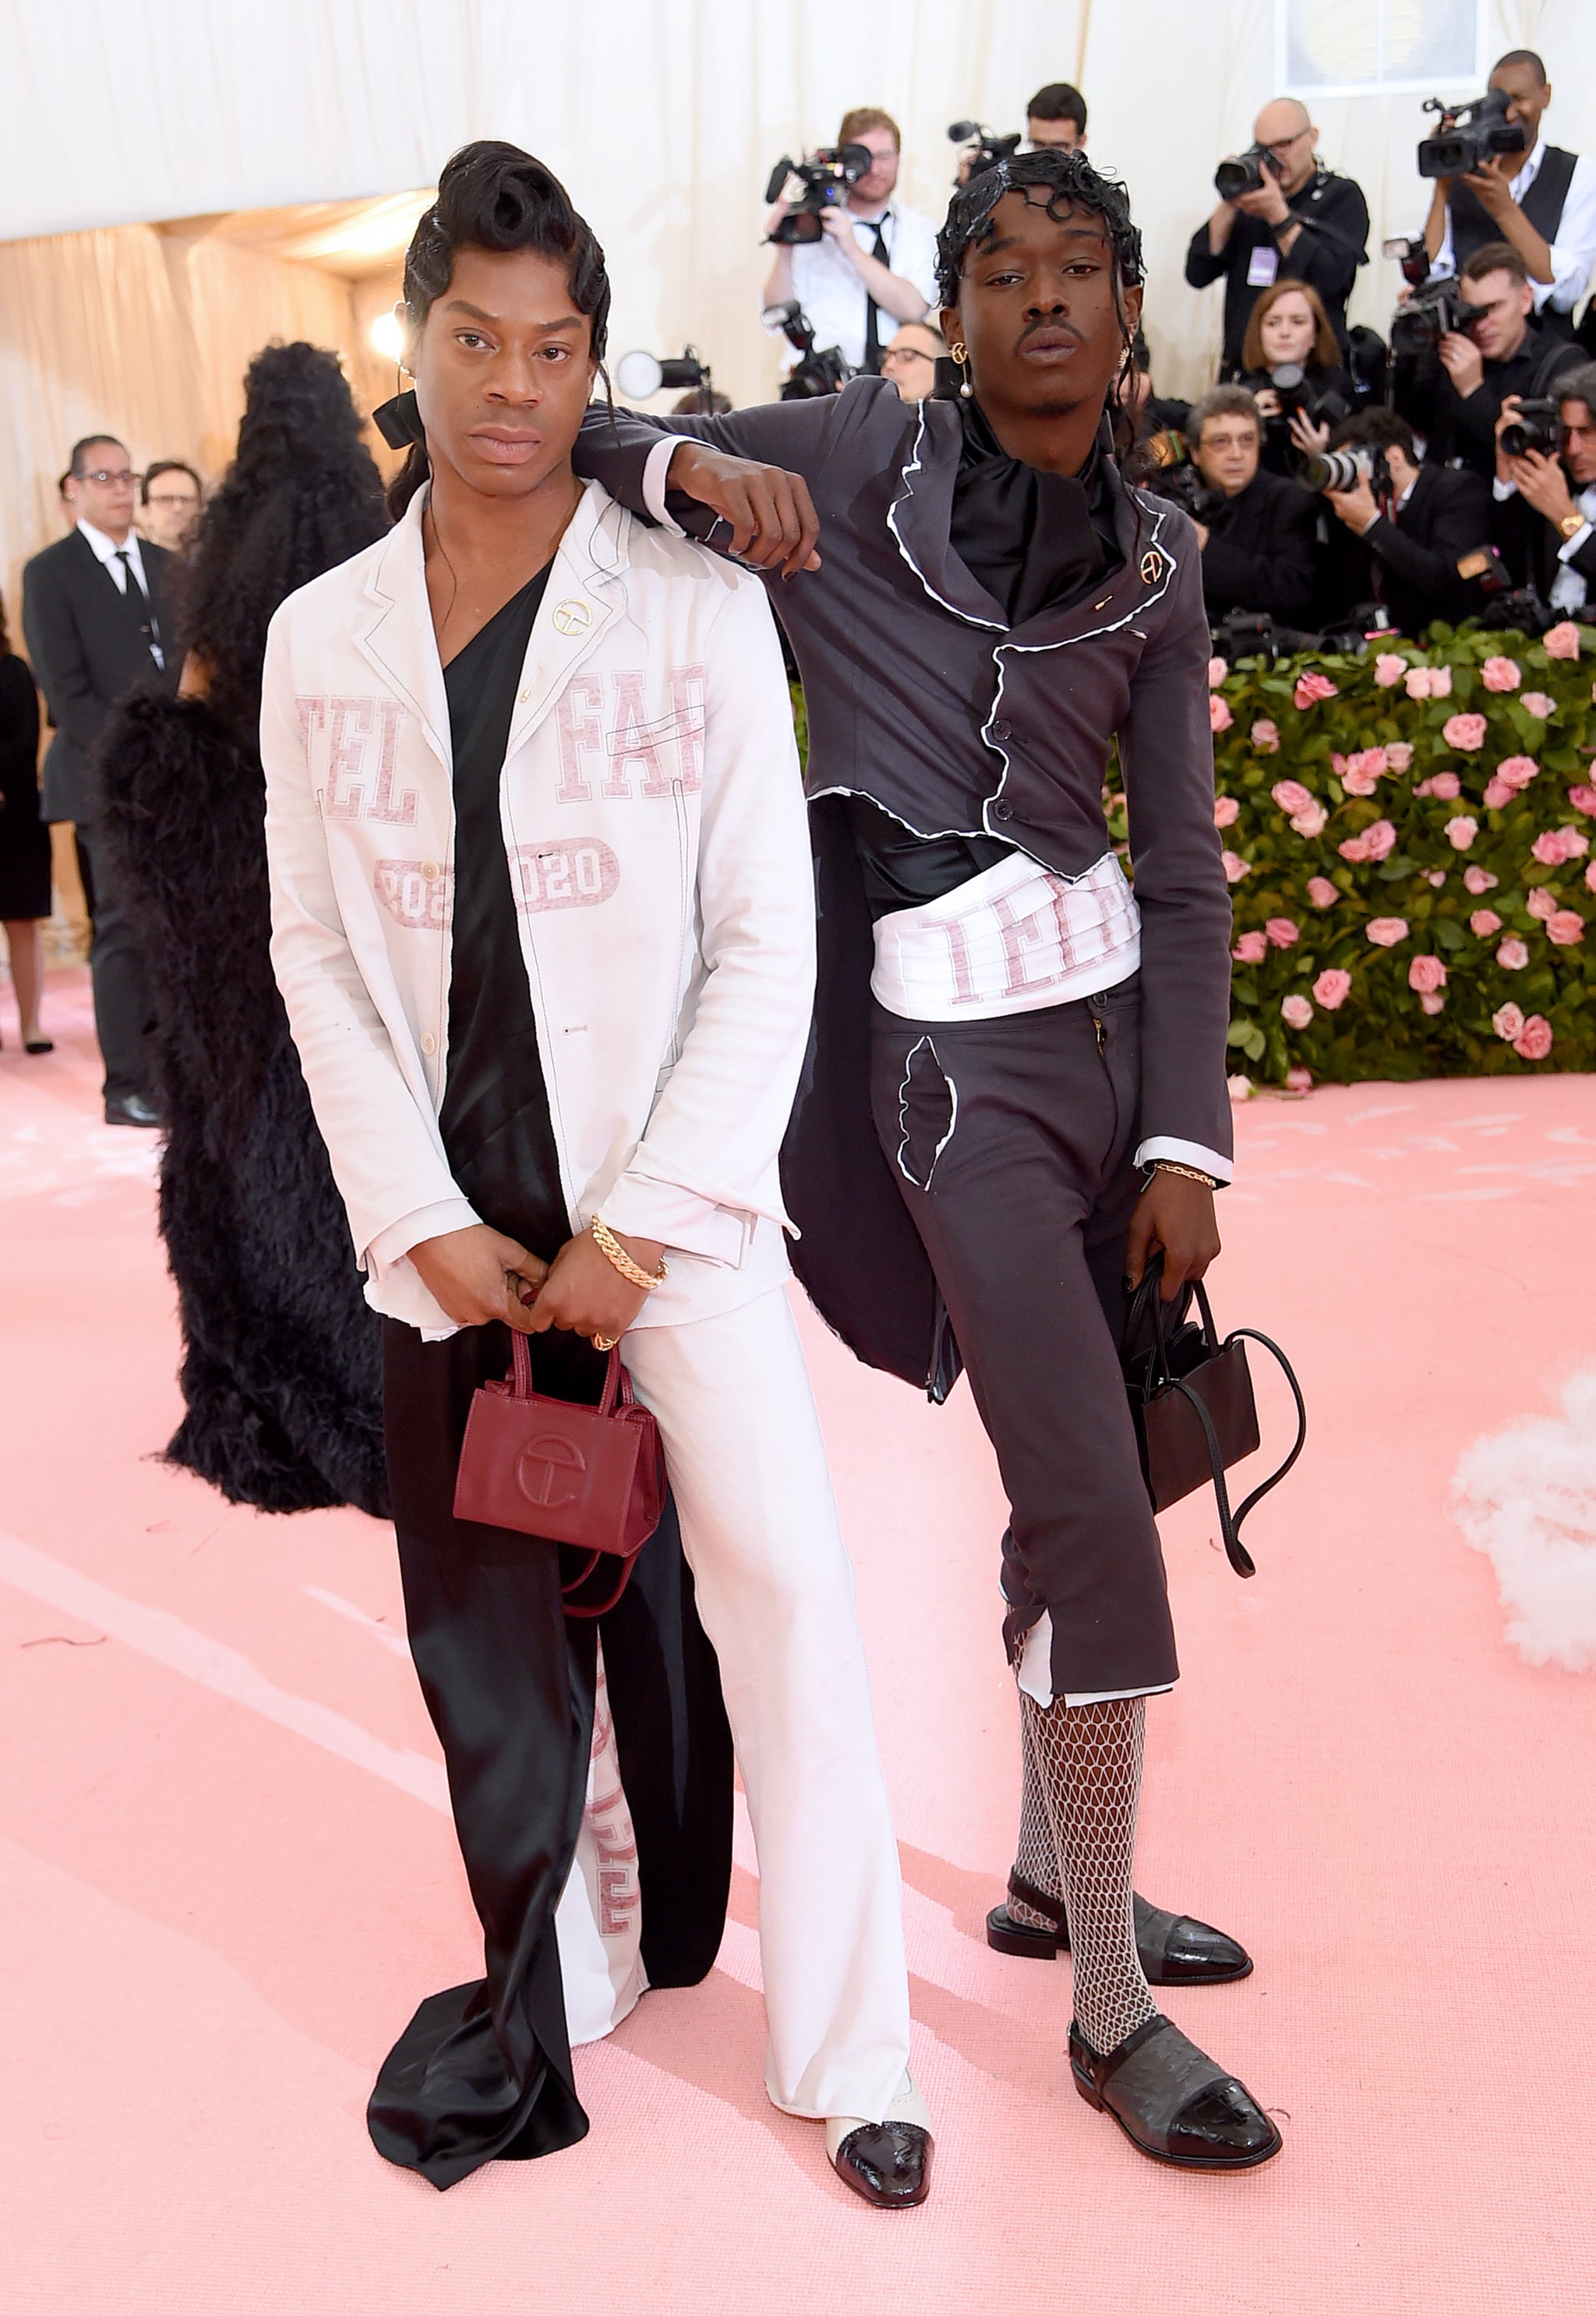 NEW YORK, NEW YORK - MAY 06:   Telfar Clemens and Ashton Sanders attend The 2019 Met Gala Celebrating Camp: Notes on Fashion at Metropolitan Museum of Art on May 06, 2019 in New York City. (Photo by Jamie McCarthy/Getty Images)